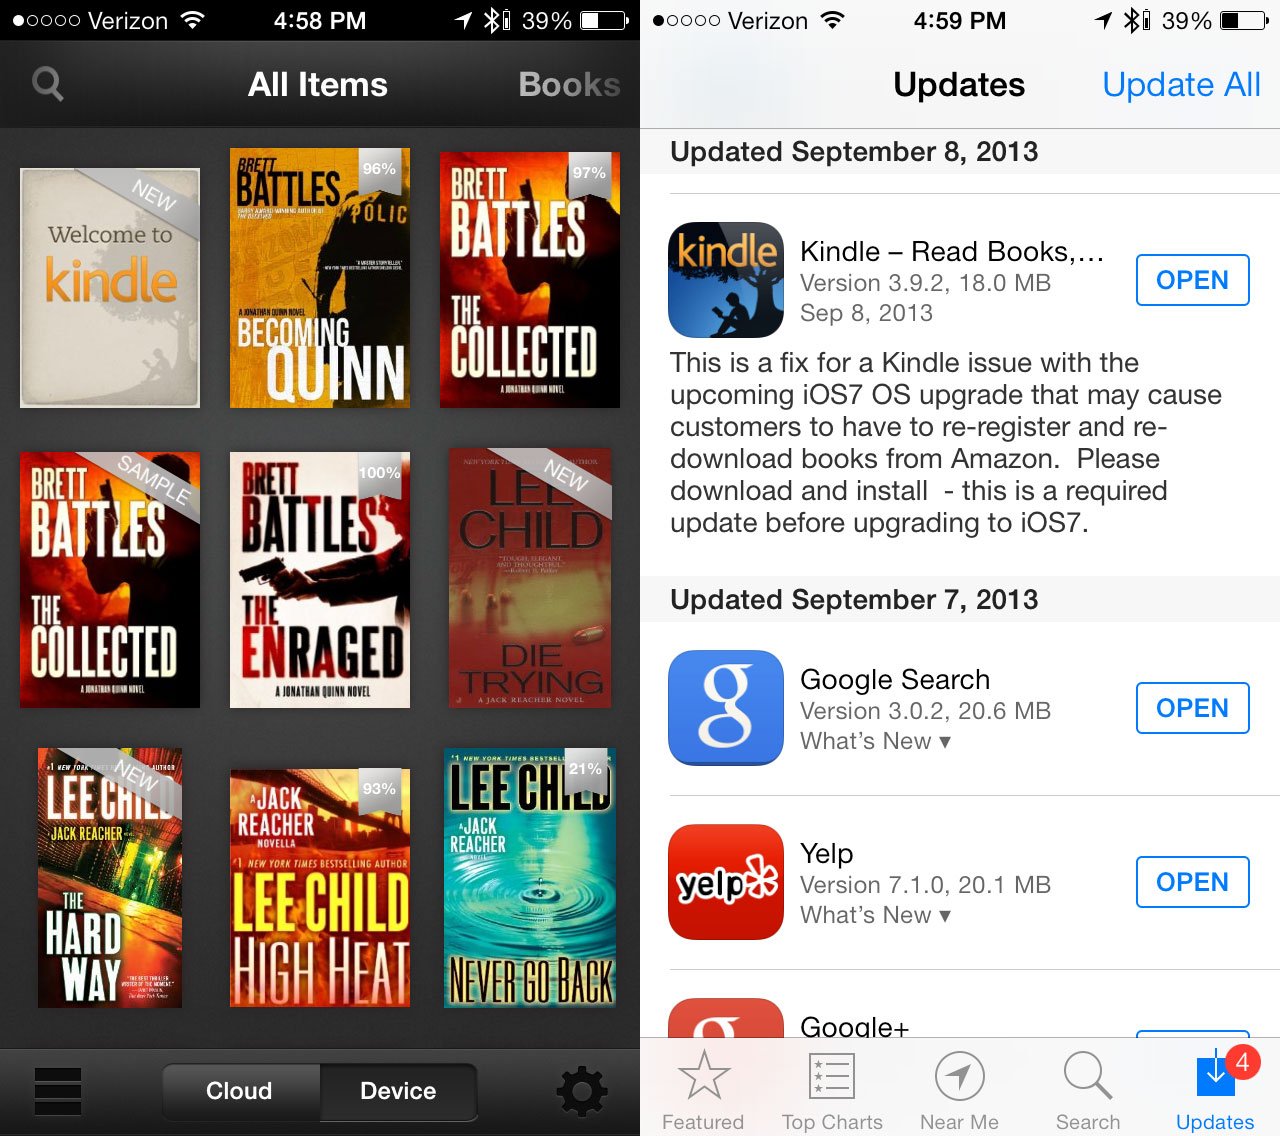 Kindle delivers an iOS 7 app update that users need to install before the iOS 7 release date.